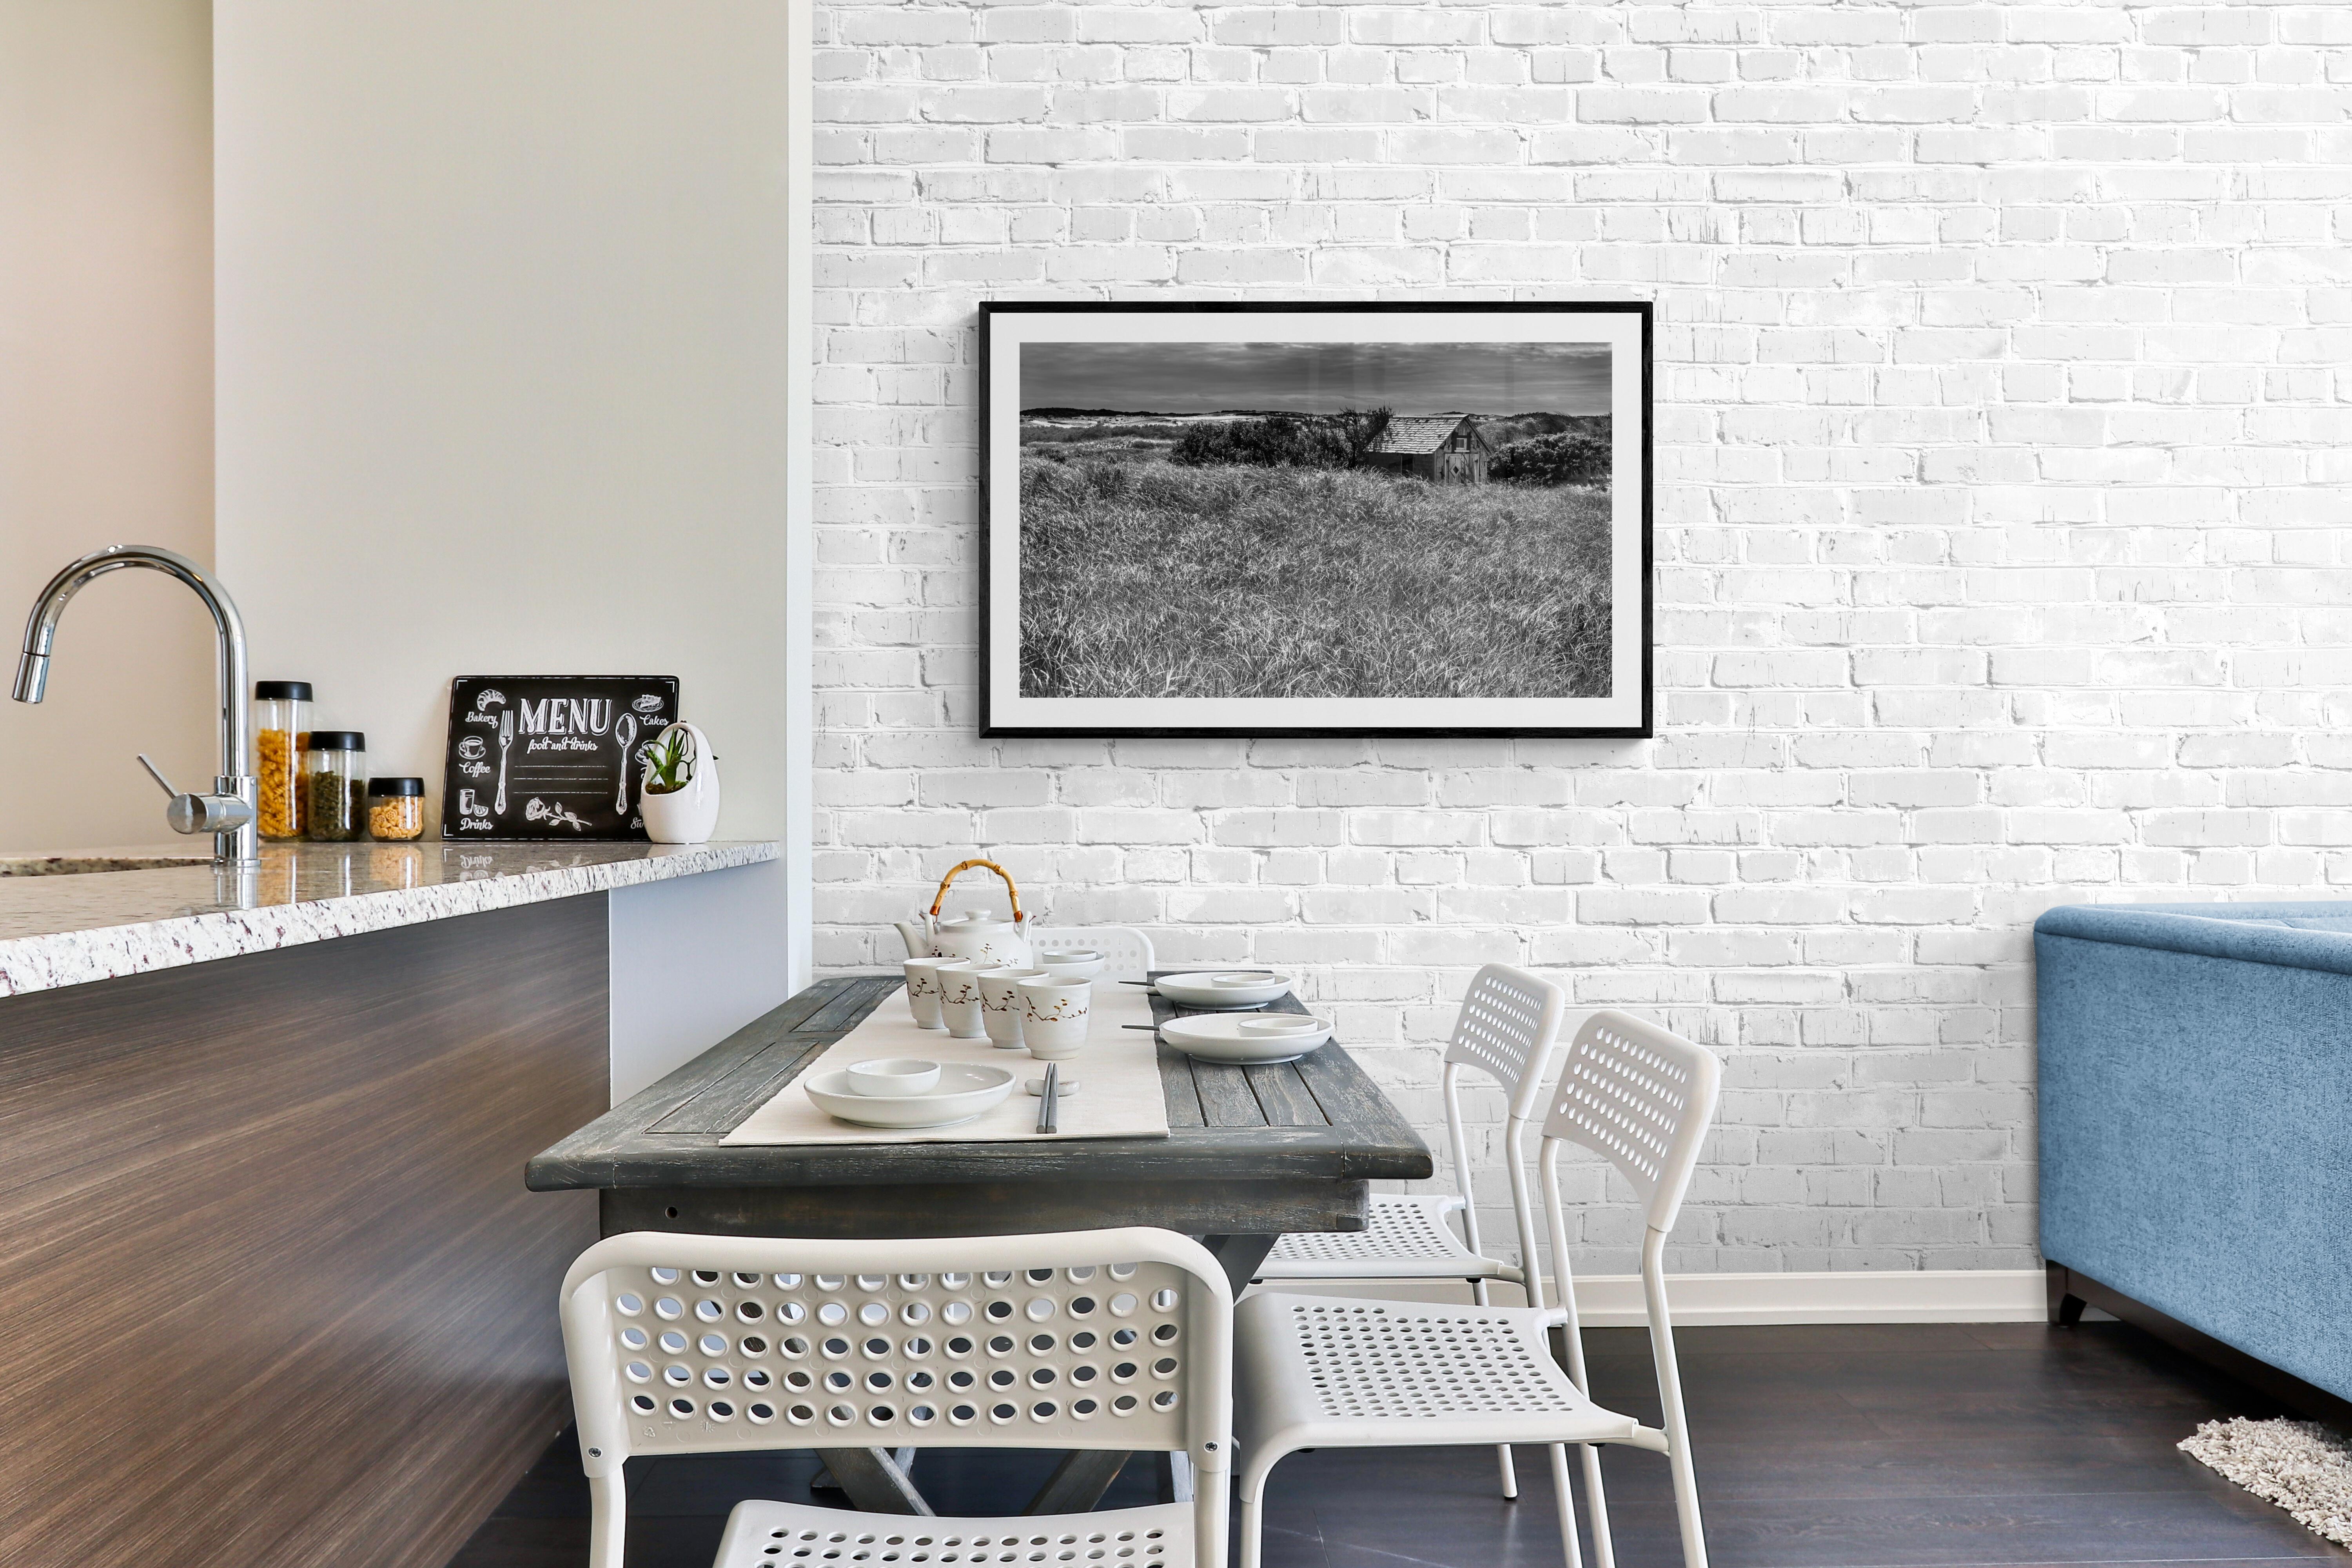 Limited Edition Black and White Photograph Cape Cod 